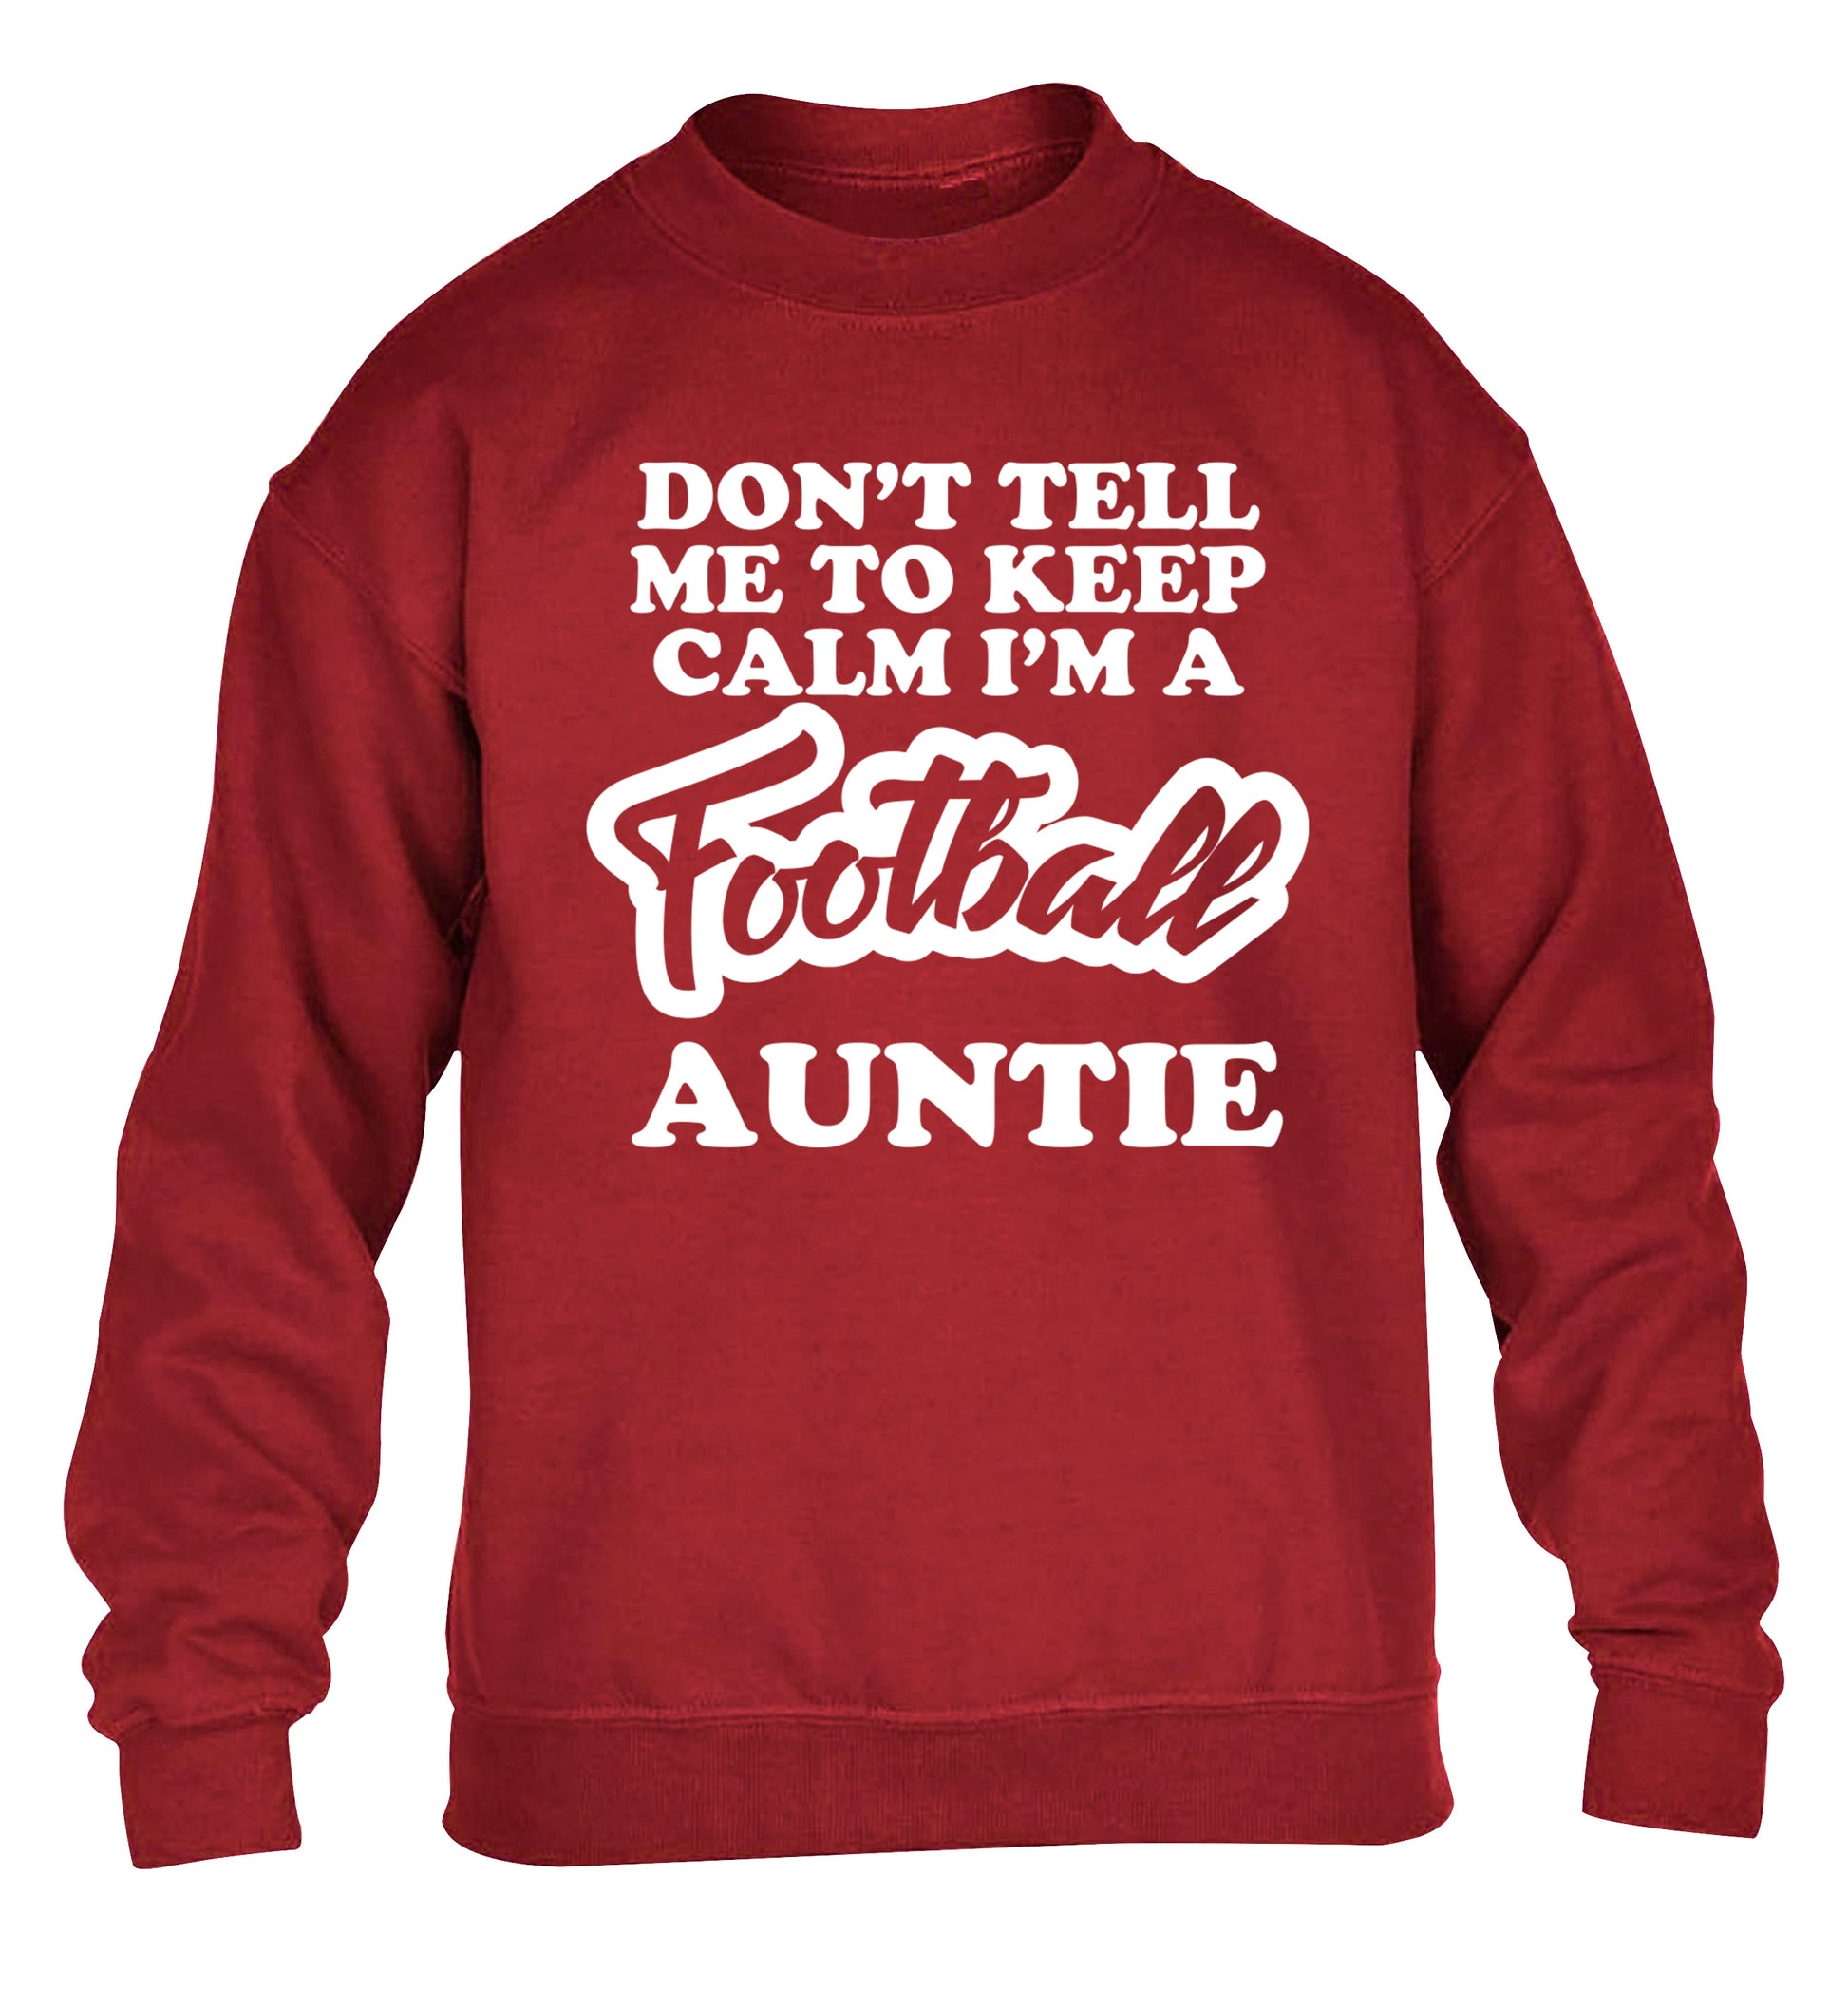 Don't tell me to keep calm I'm a football auntie children's grey sweater 12-14 Years